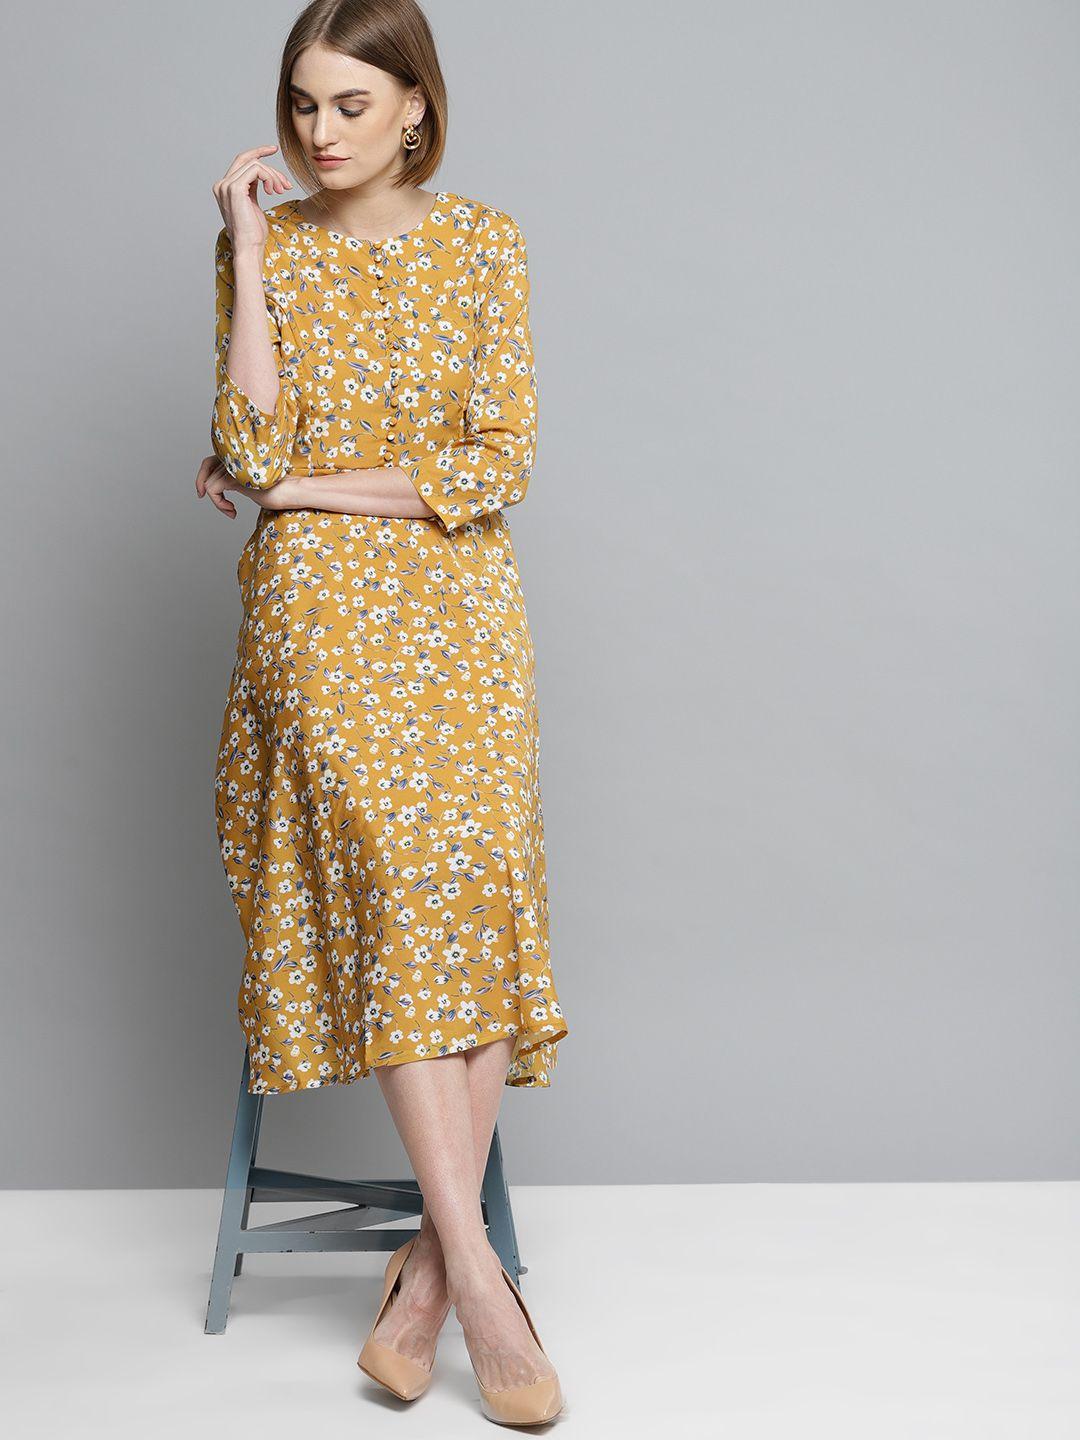 marie claire women mustard yellow printed fit & flare dress